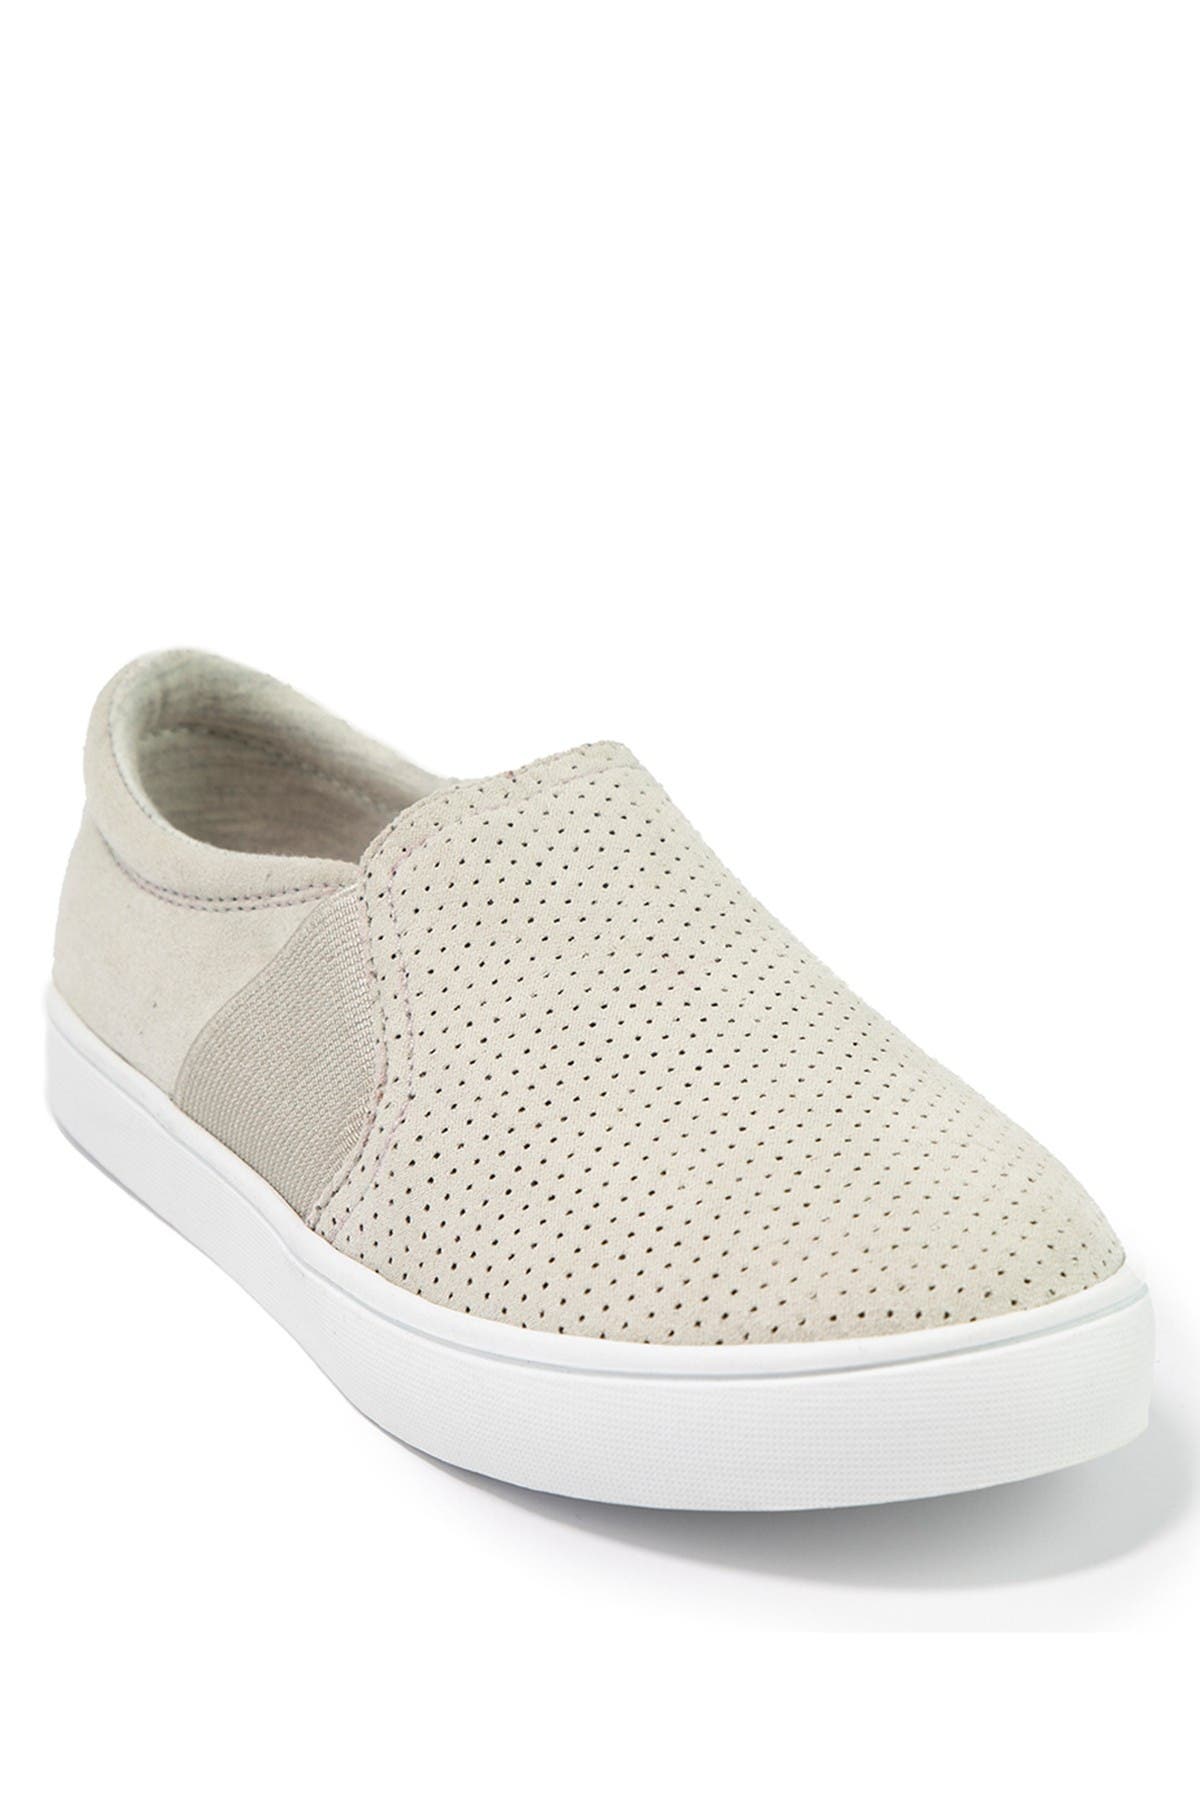 dr scholl's perforated sneaker